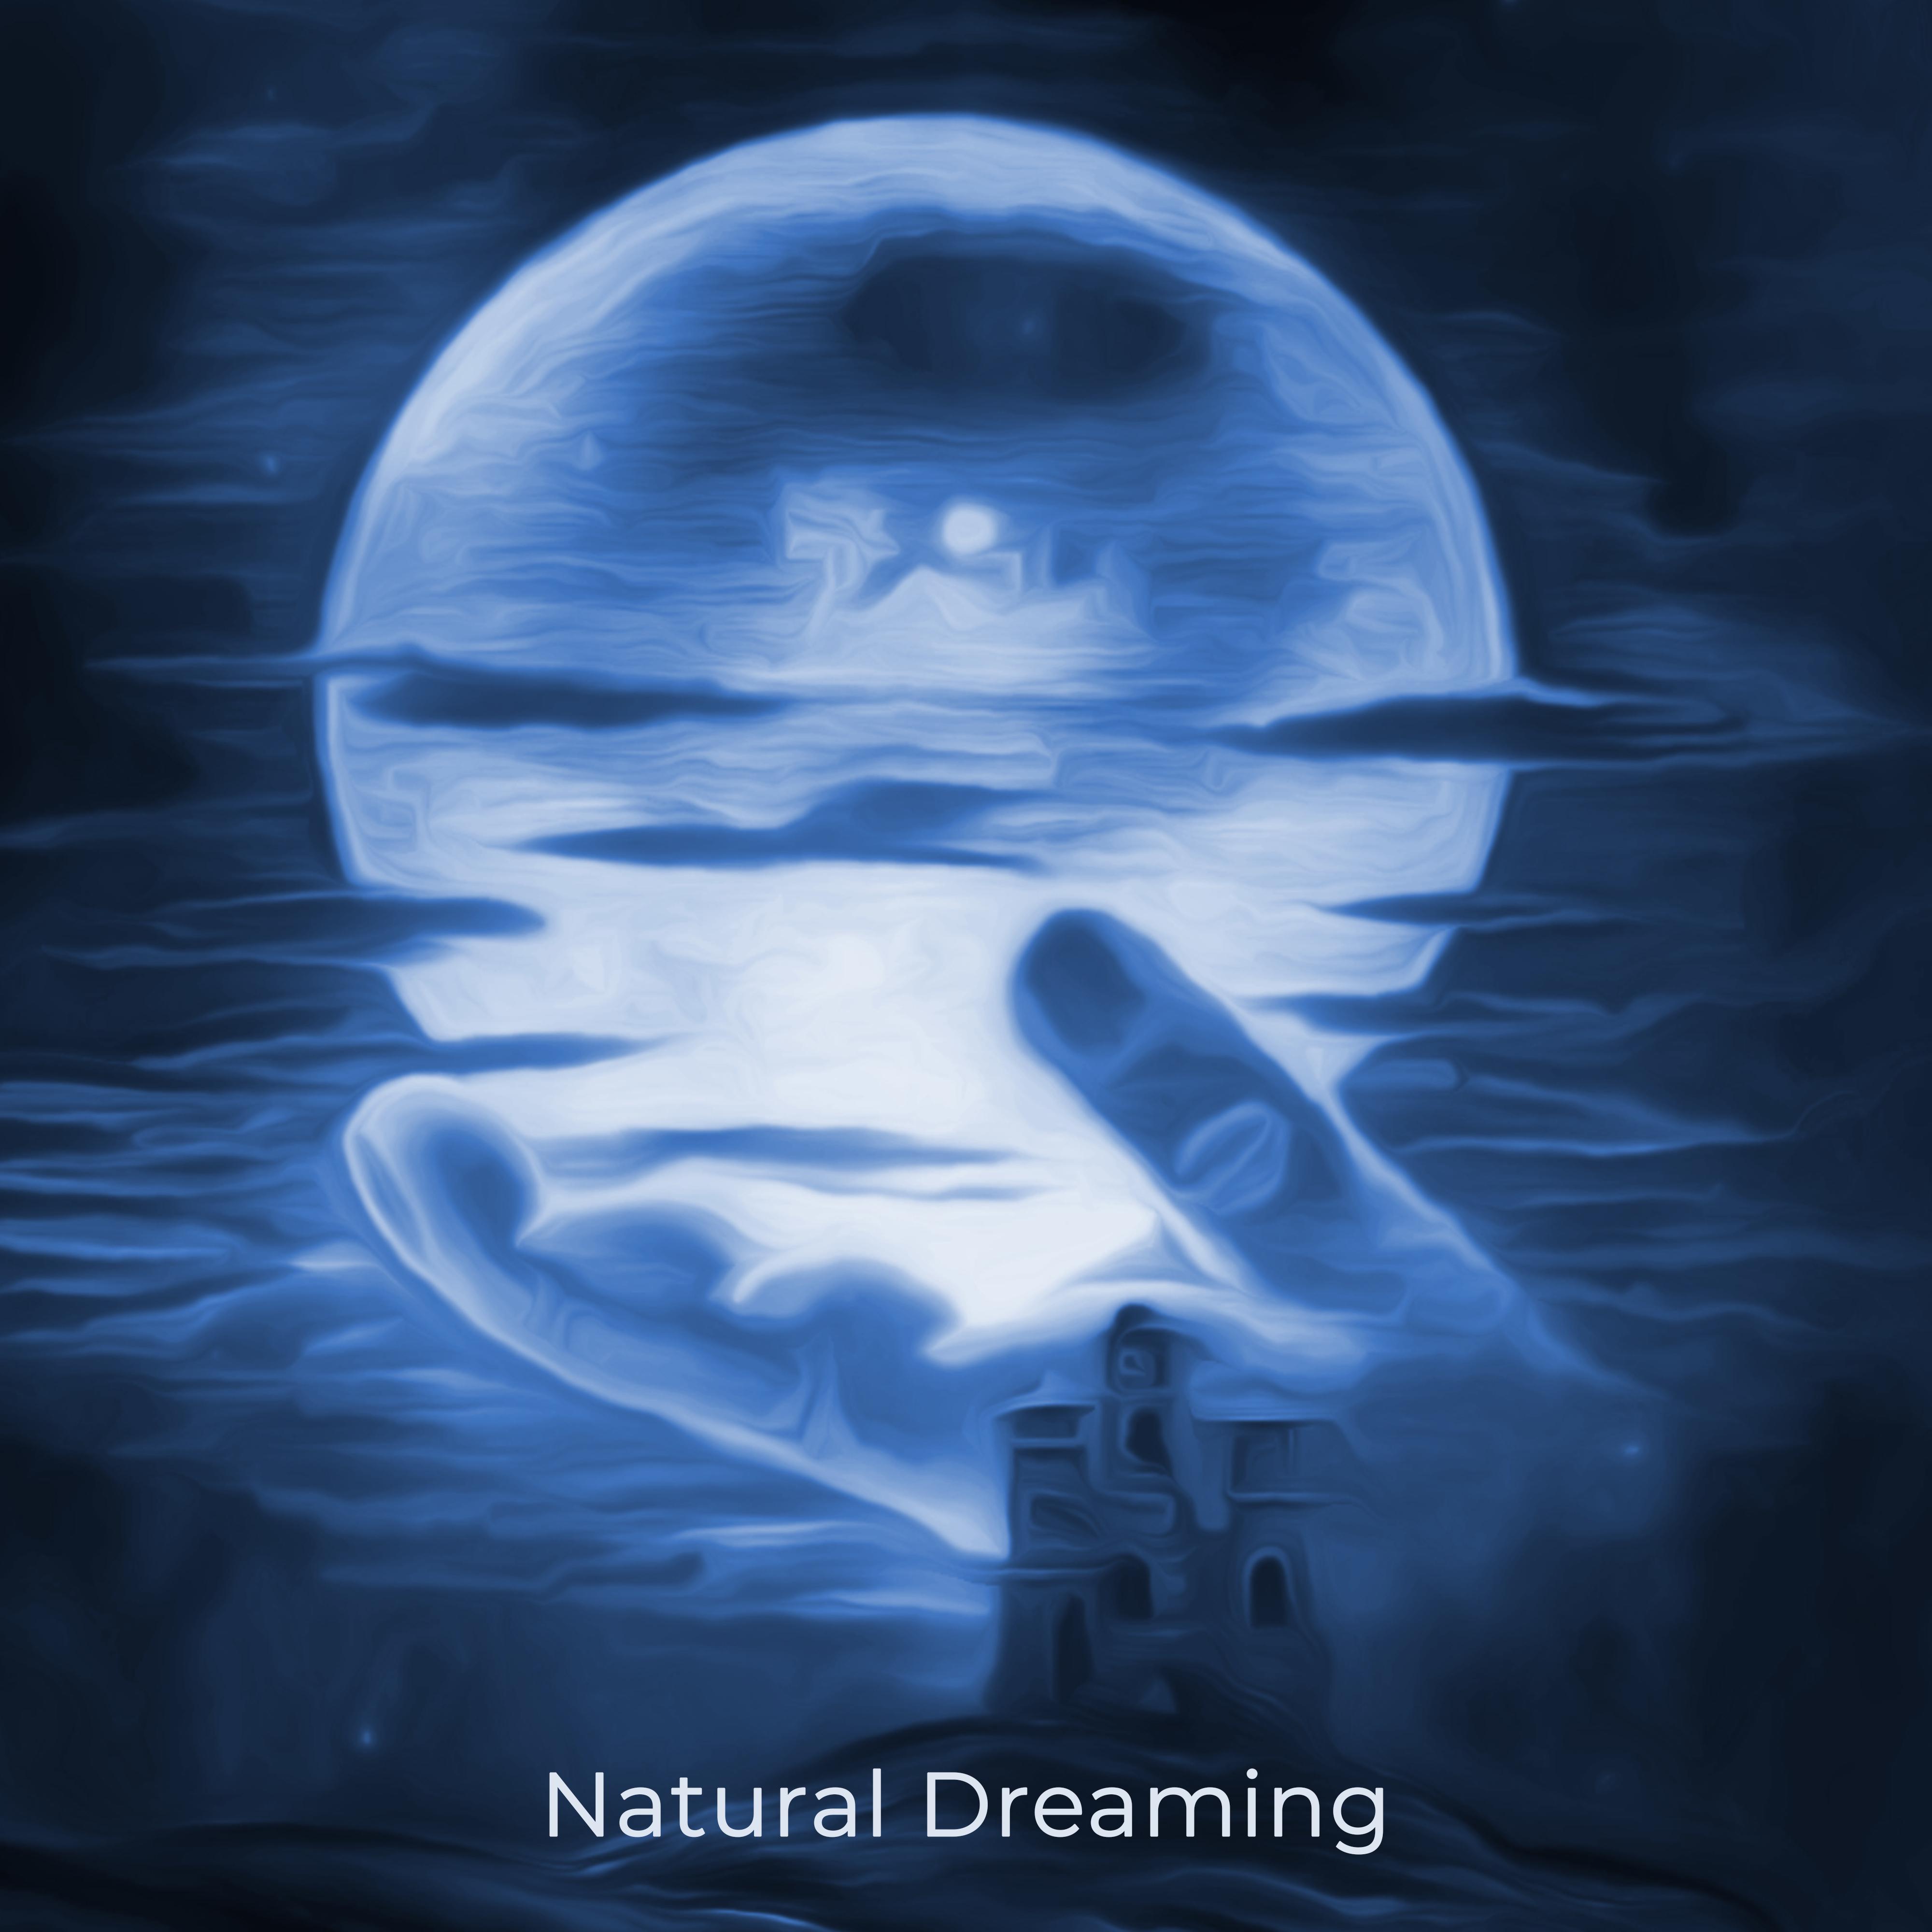 Natural Dreaming – Compilation of 15 Songs to Sleep